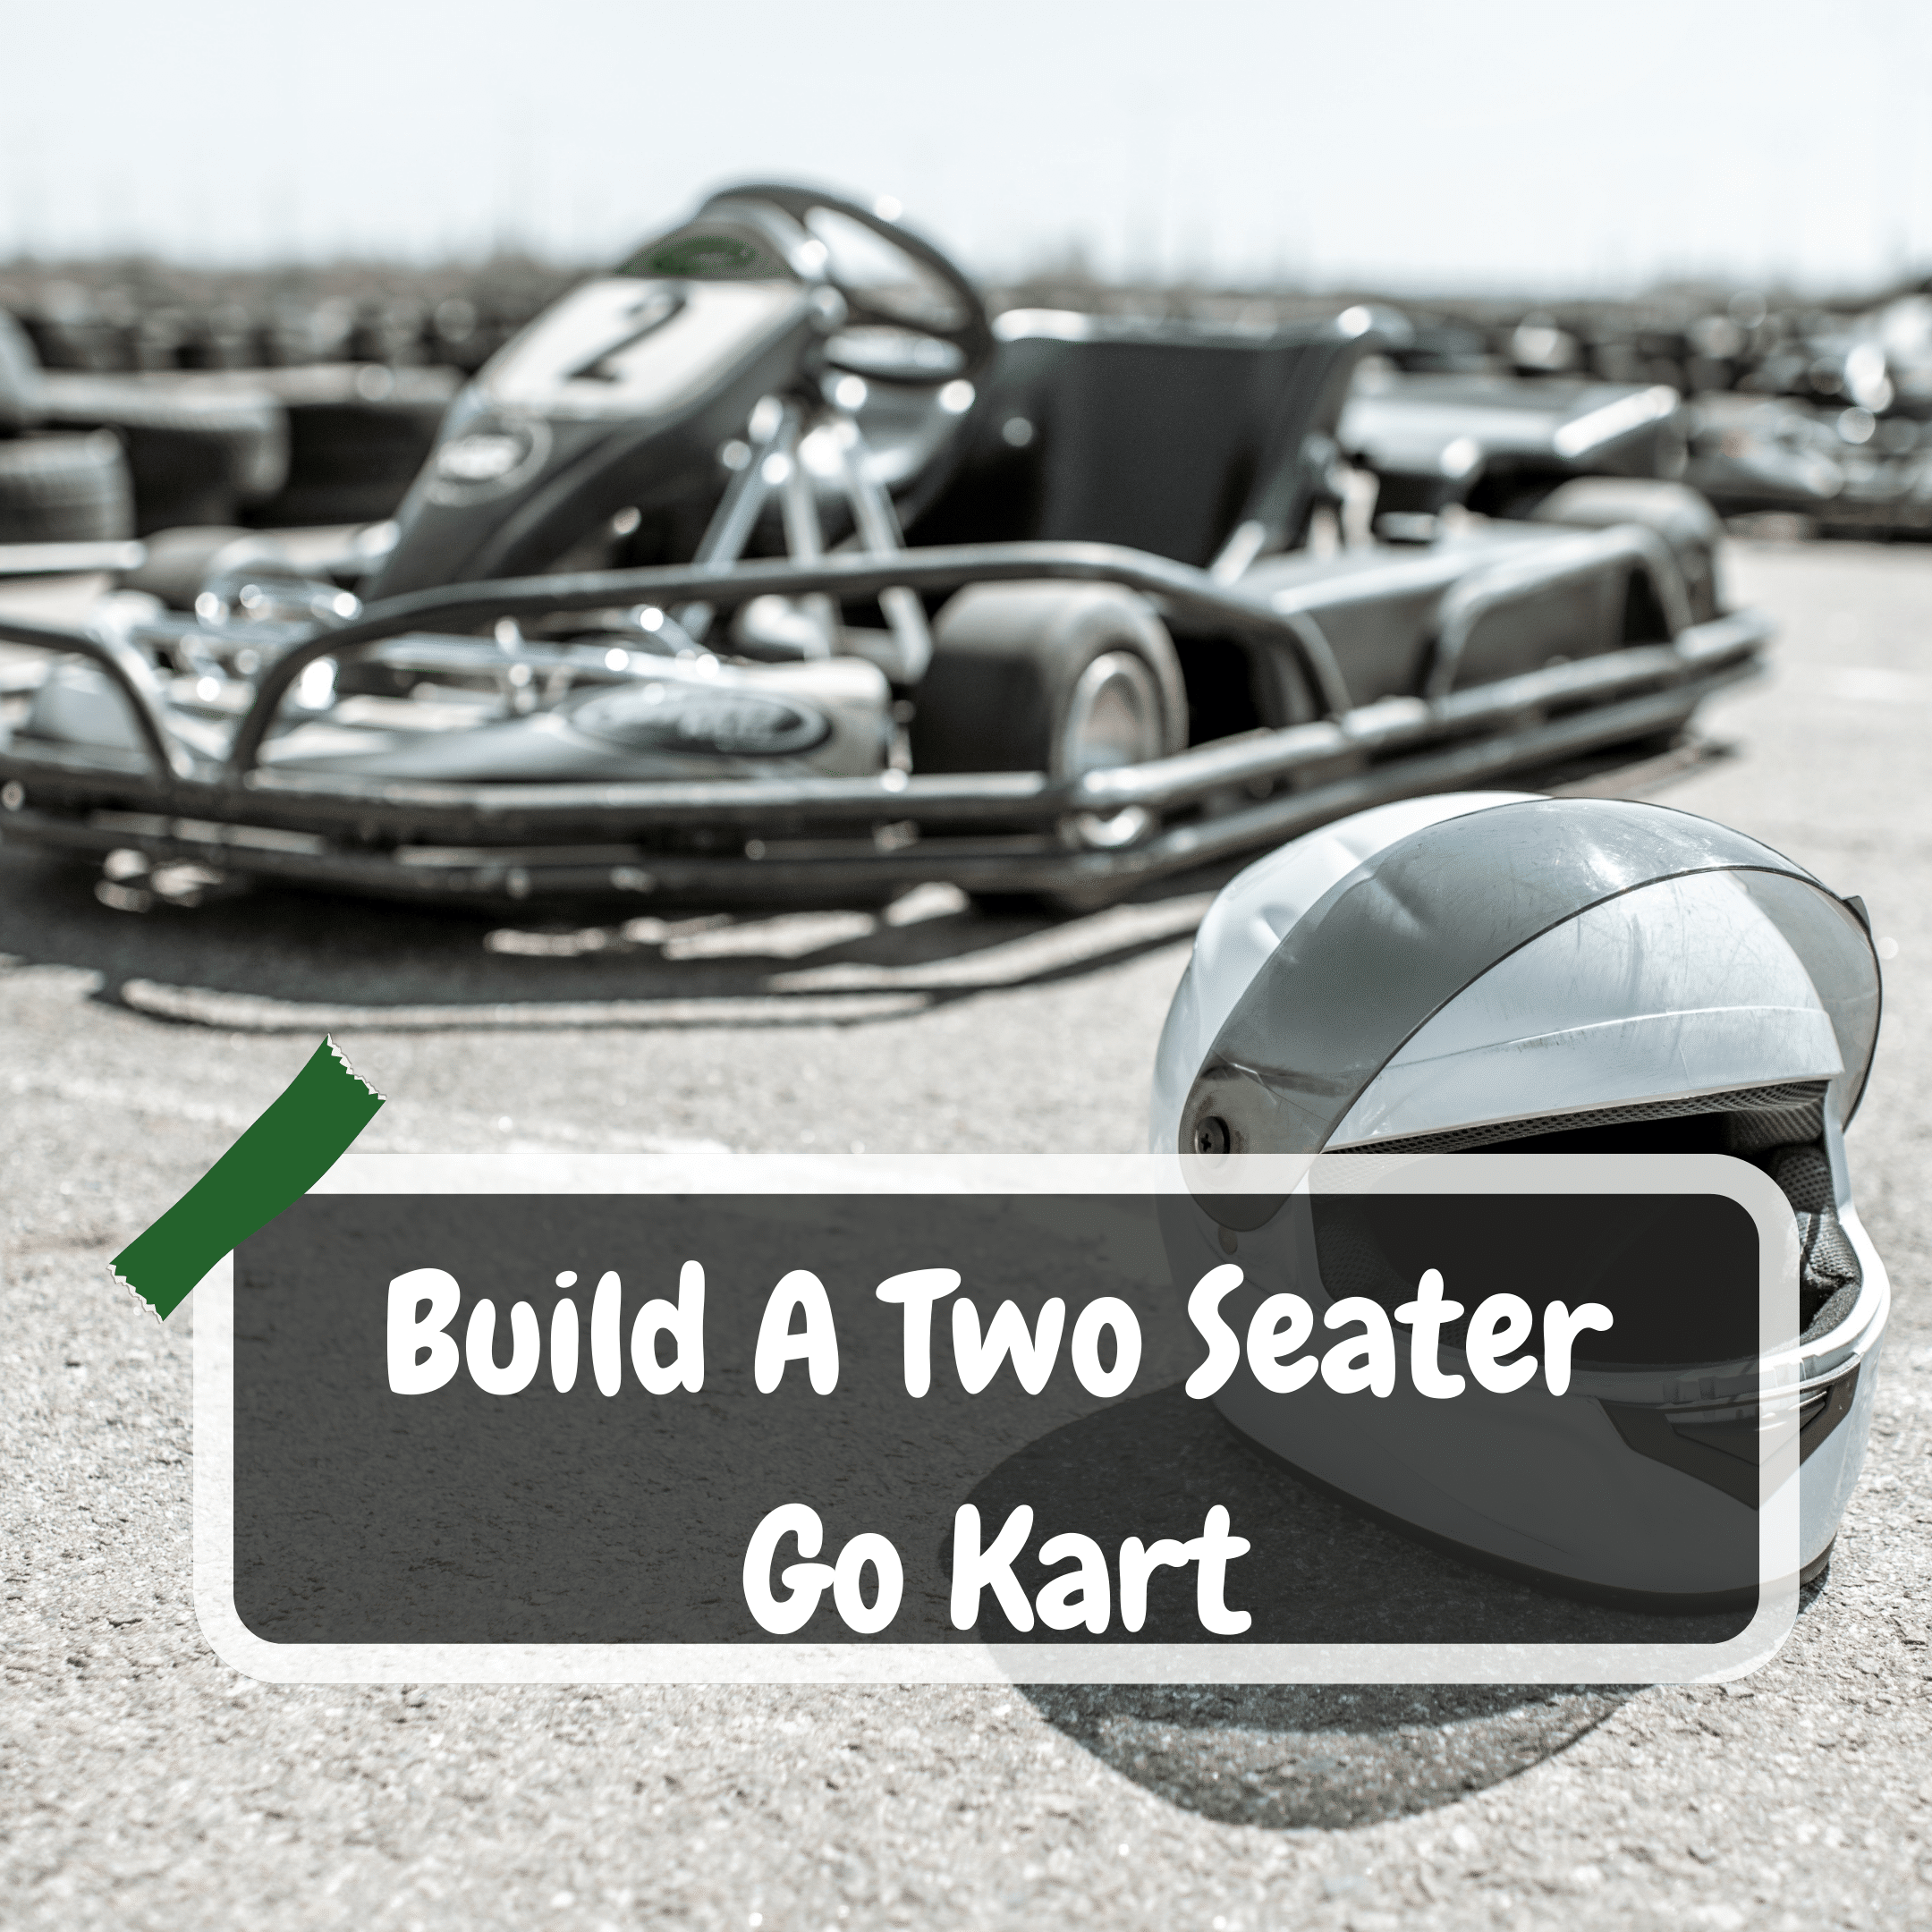 Build A Two Seater Go Kart